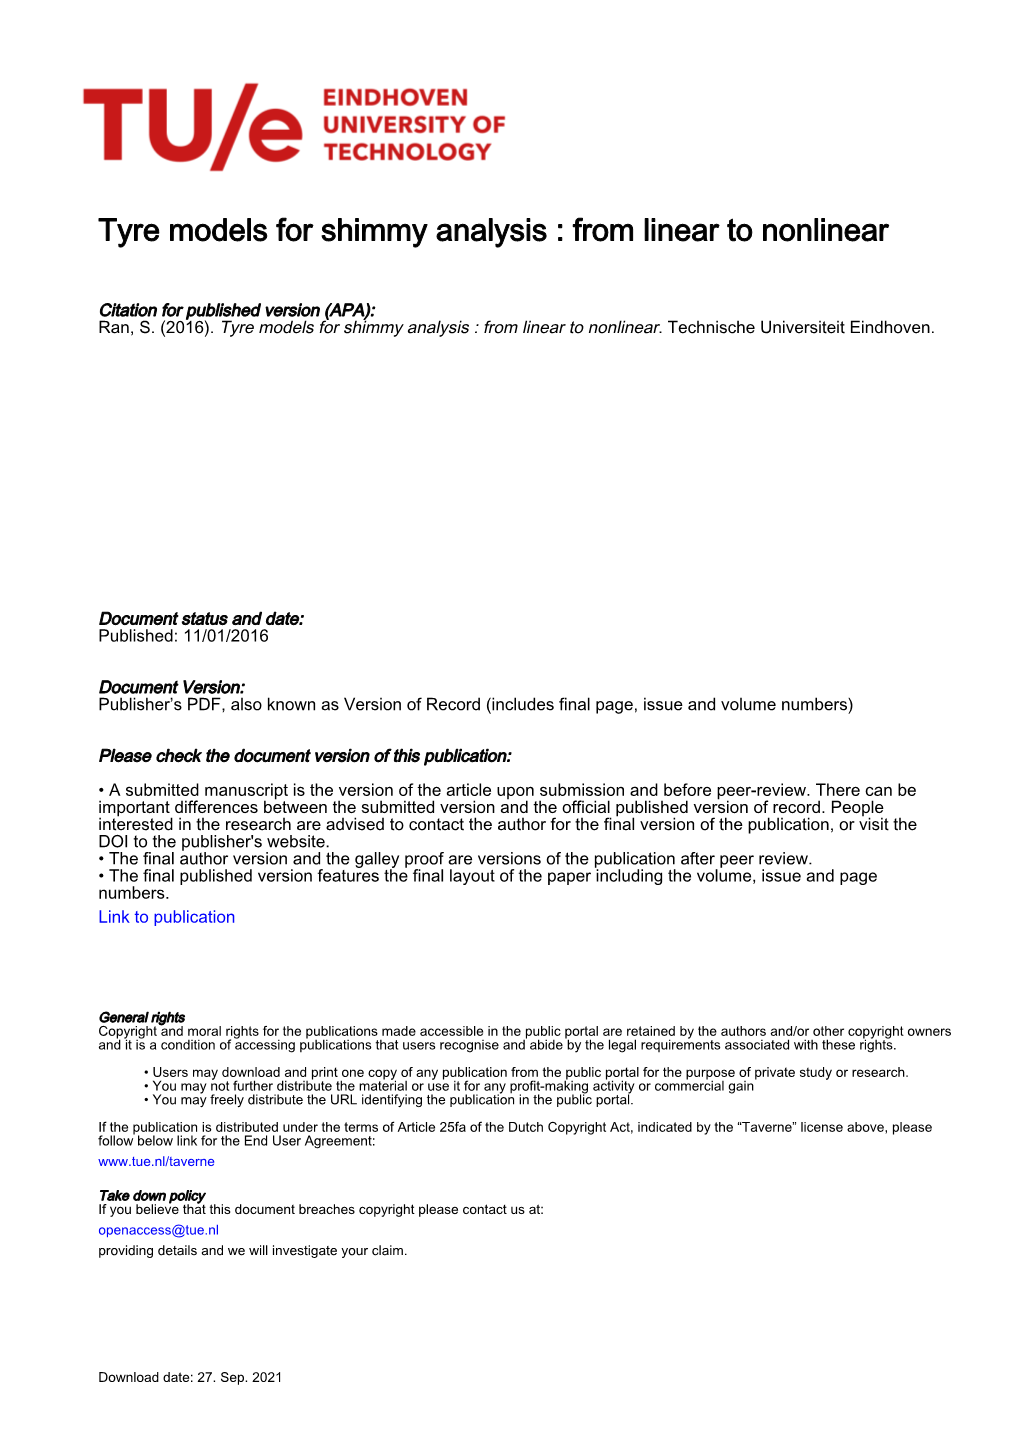 Tyre Models for Shimmy Analysis: from Linear to Nonlinear